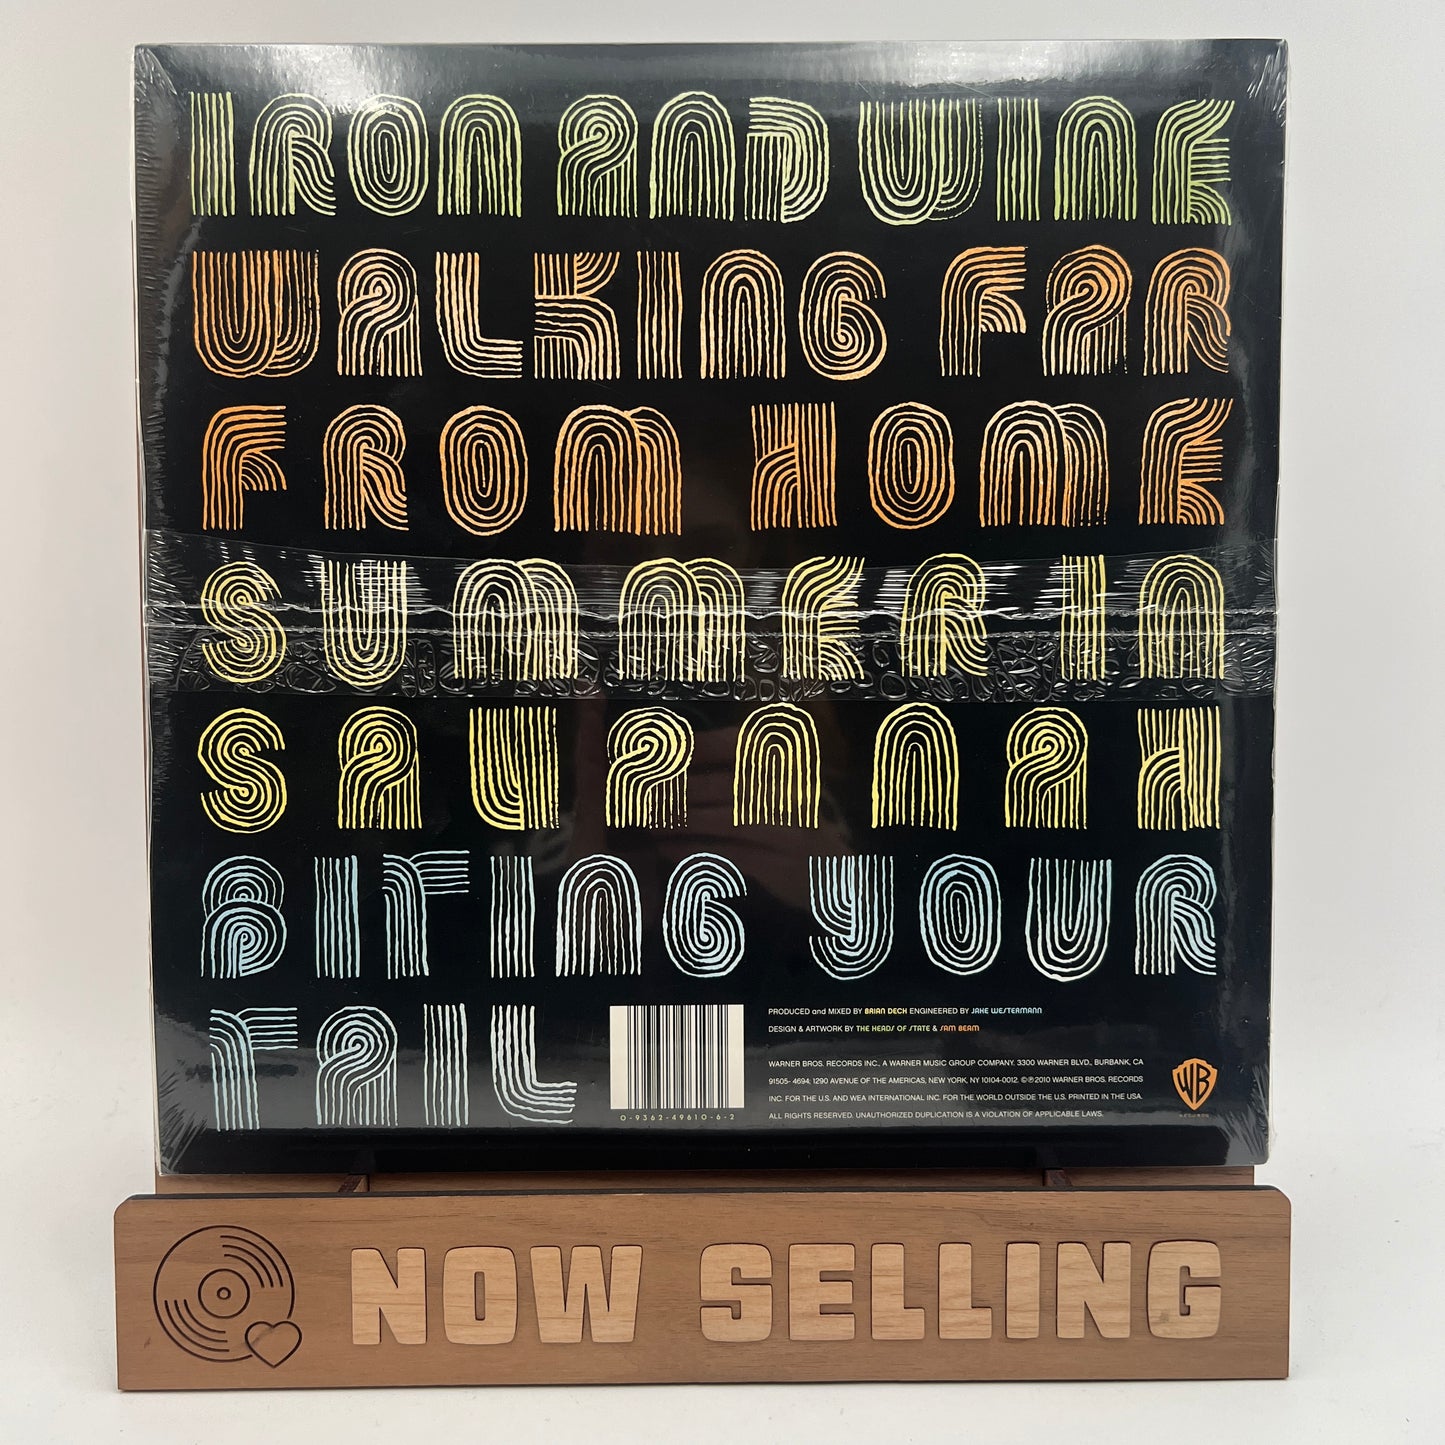 Iron And Wine - Walking Far From Home Vinyl LP SEALED Record Store Day